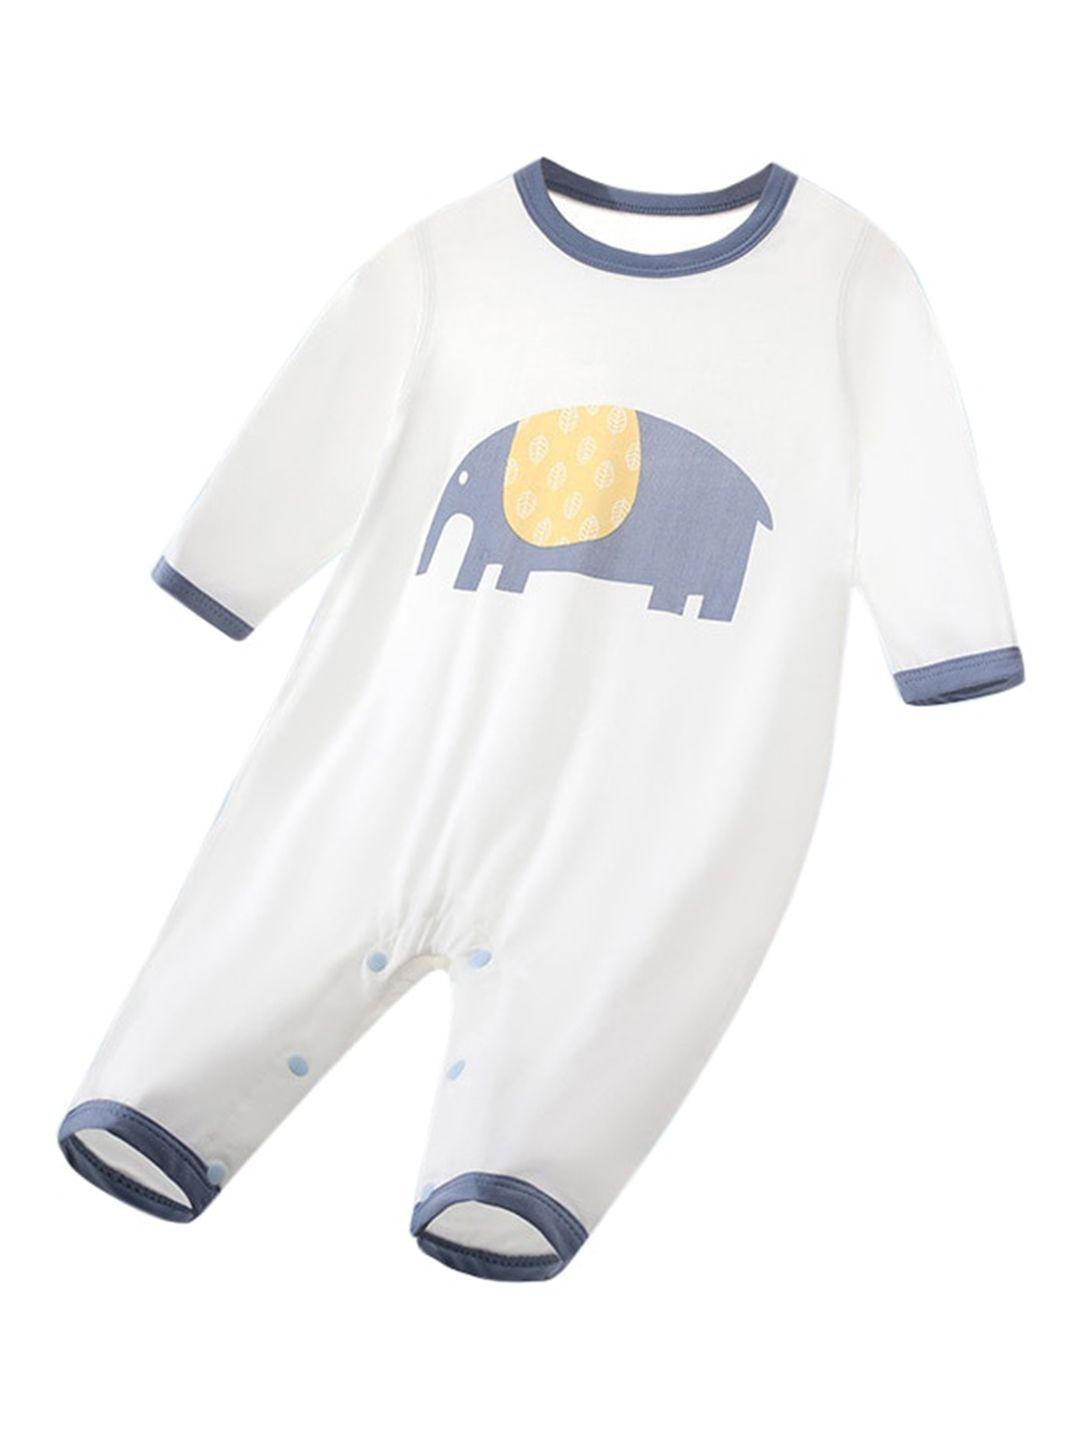 stylecast boys conversational printed cotton rompers